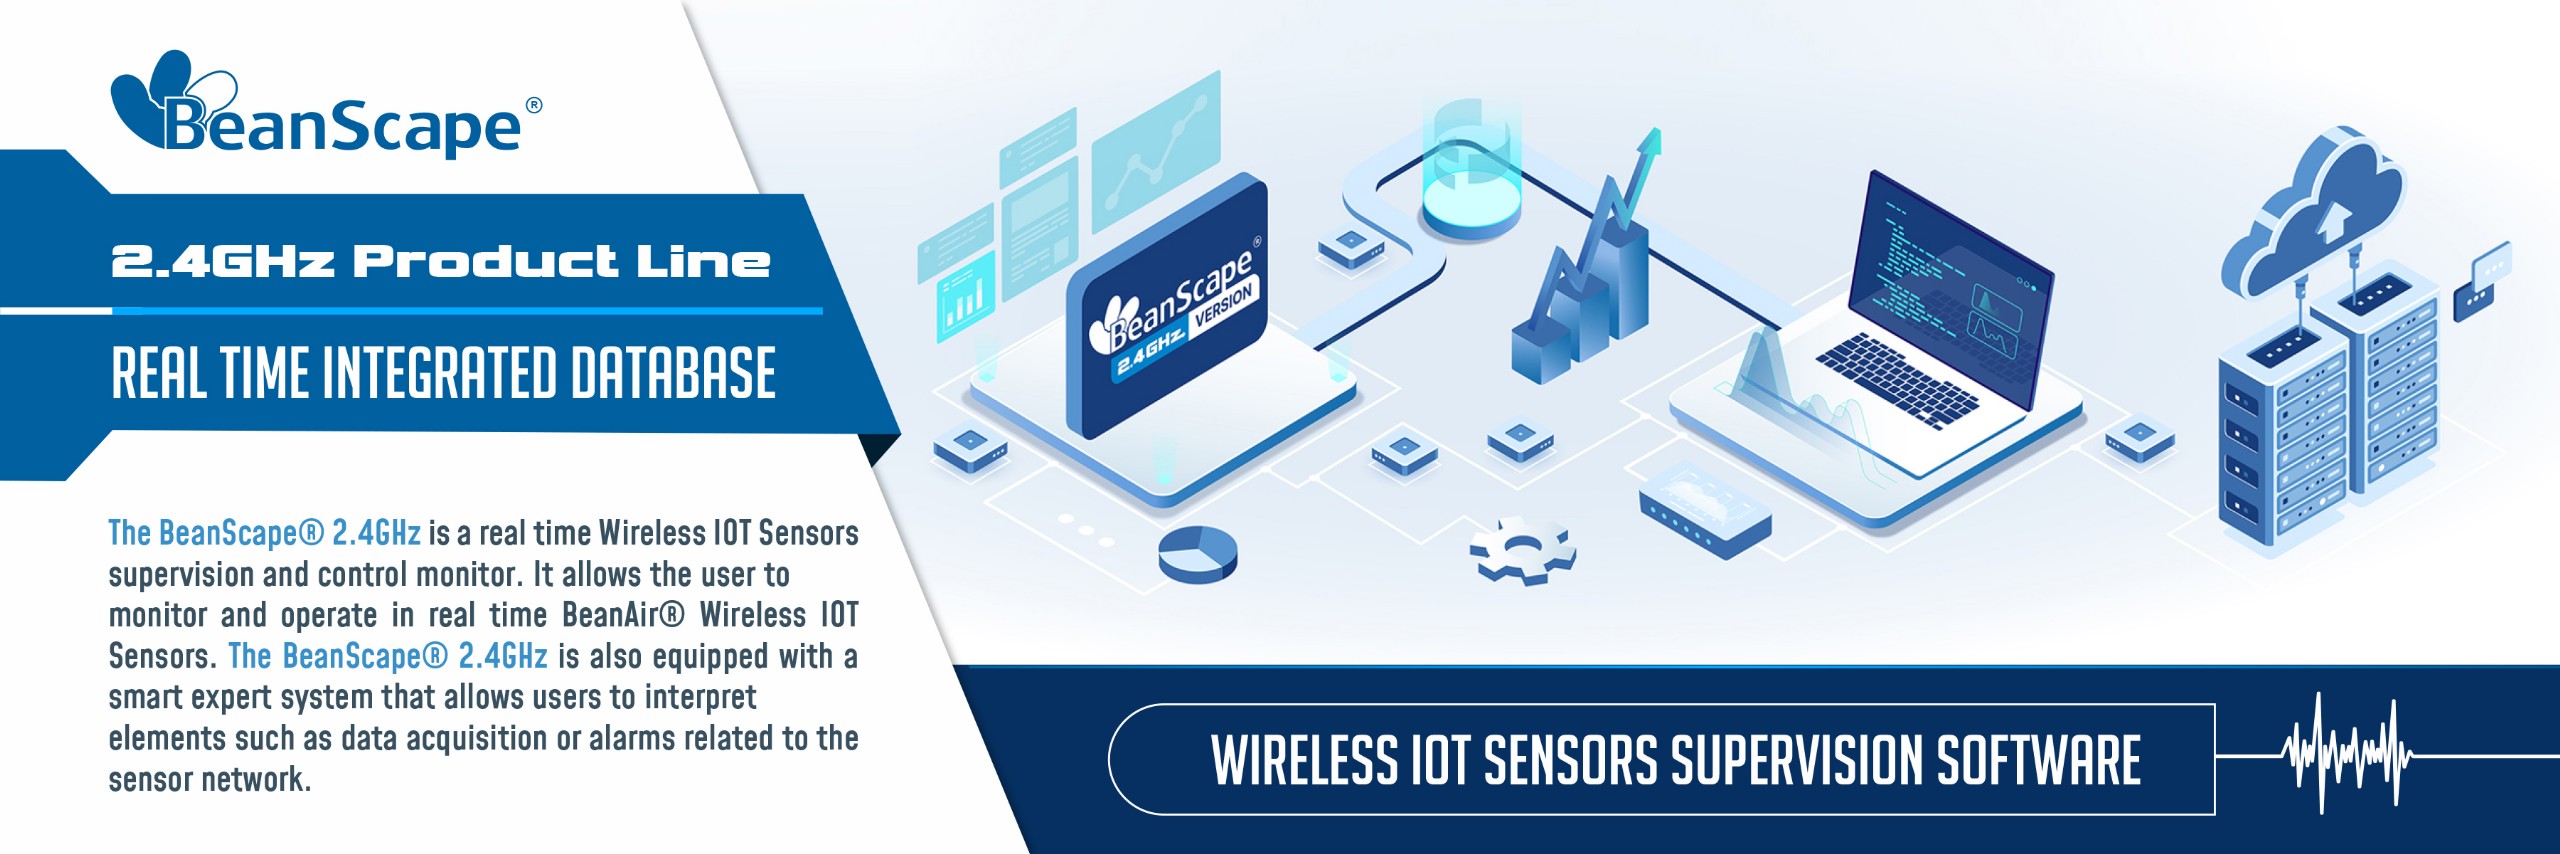 « BANNER beanscape wilow wifi wireless supervision software »